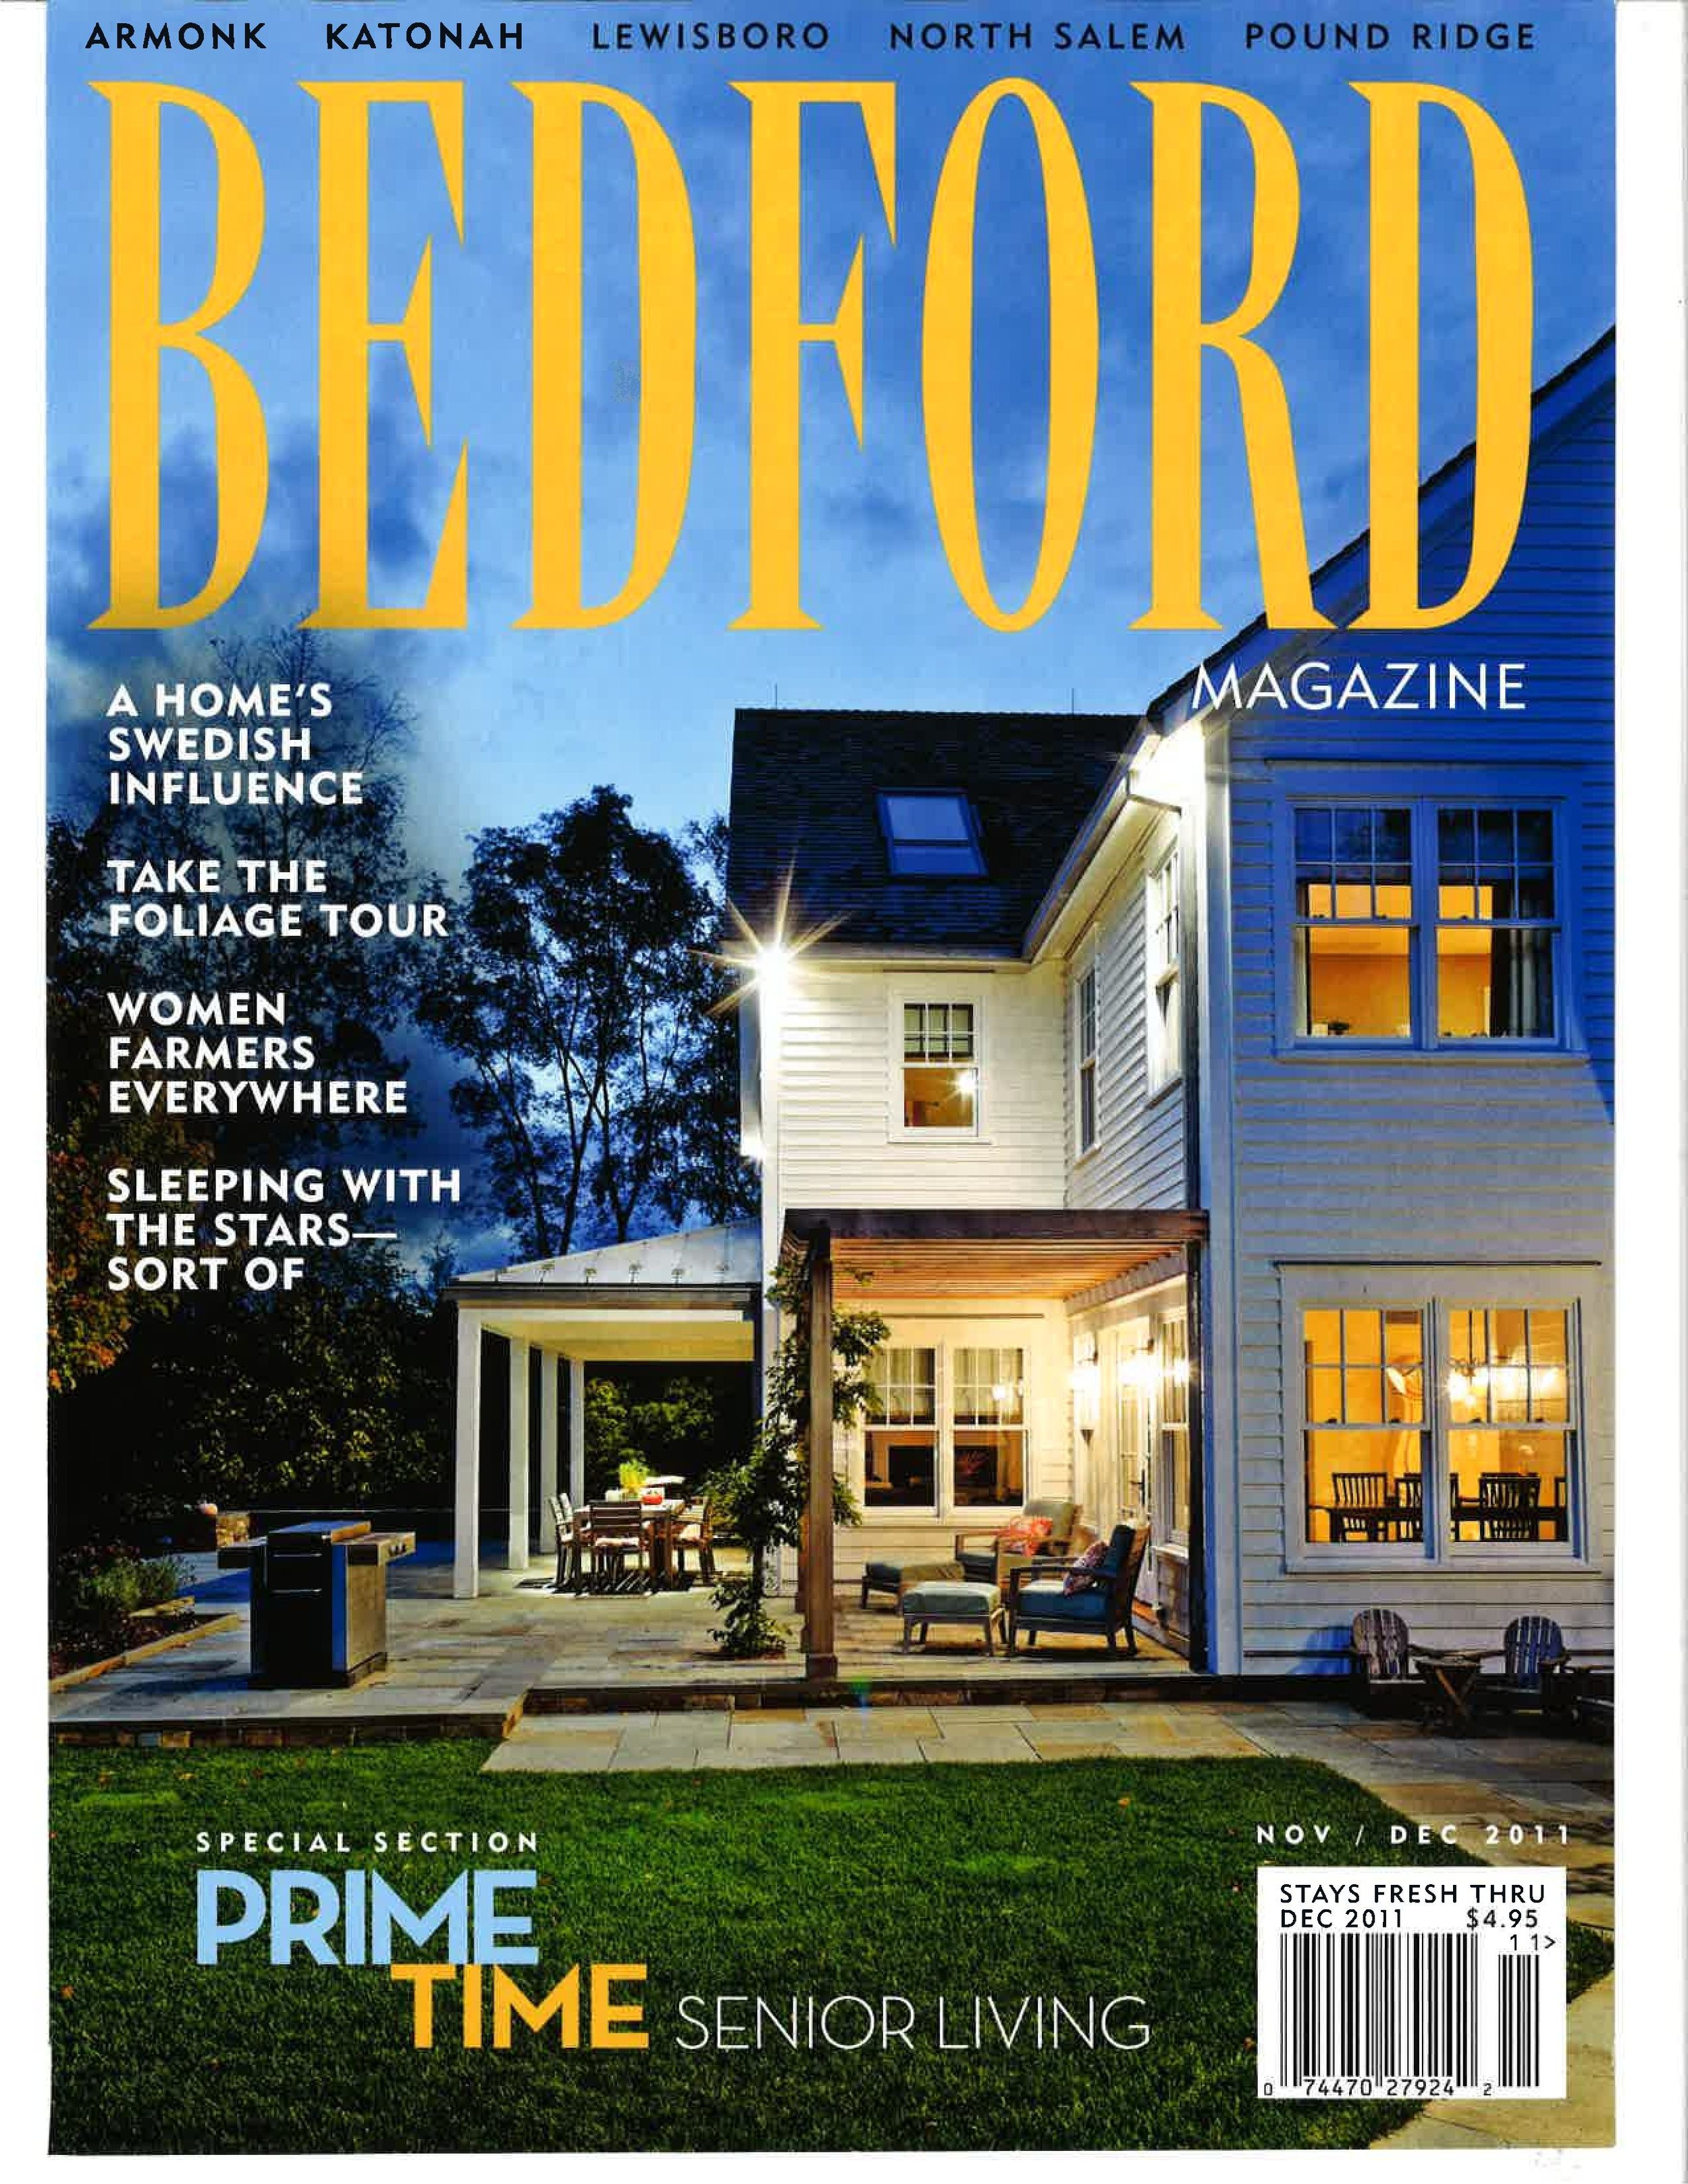 BedfordCover-page-001.jpg